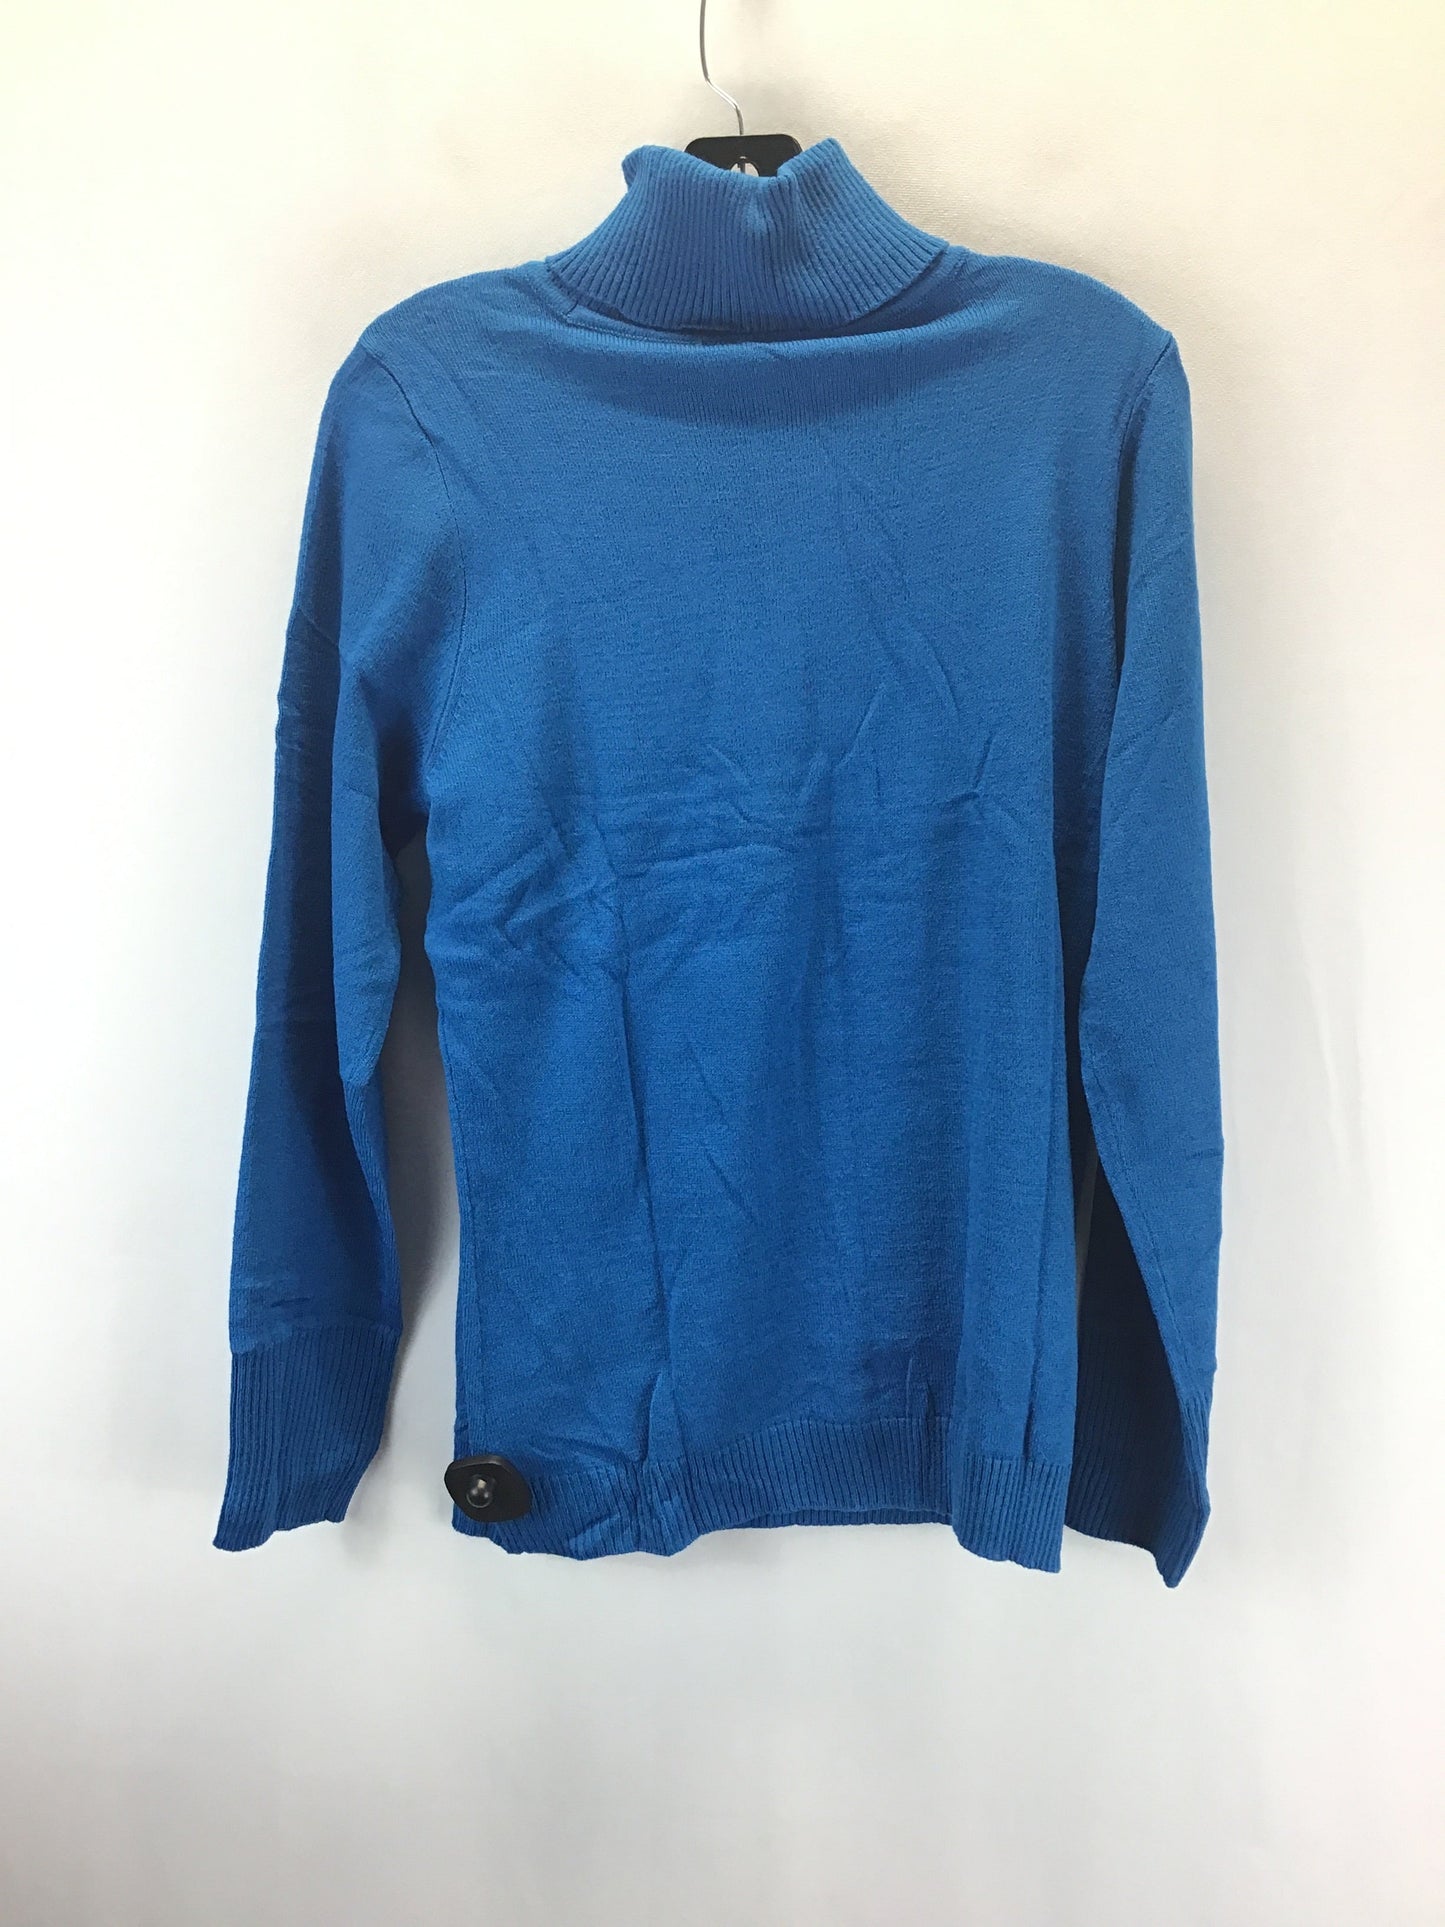 Sweater By New York And Co  Size: M